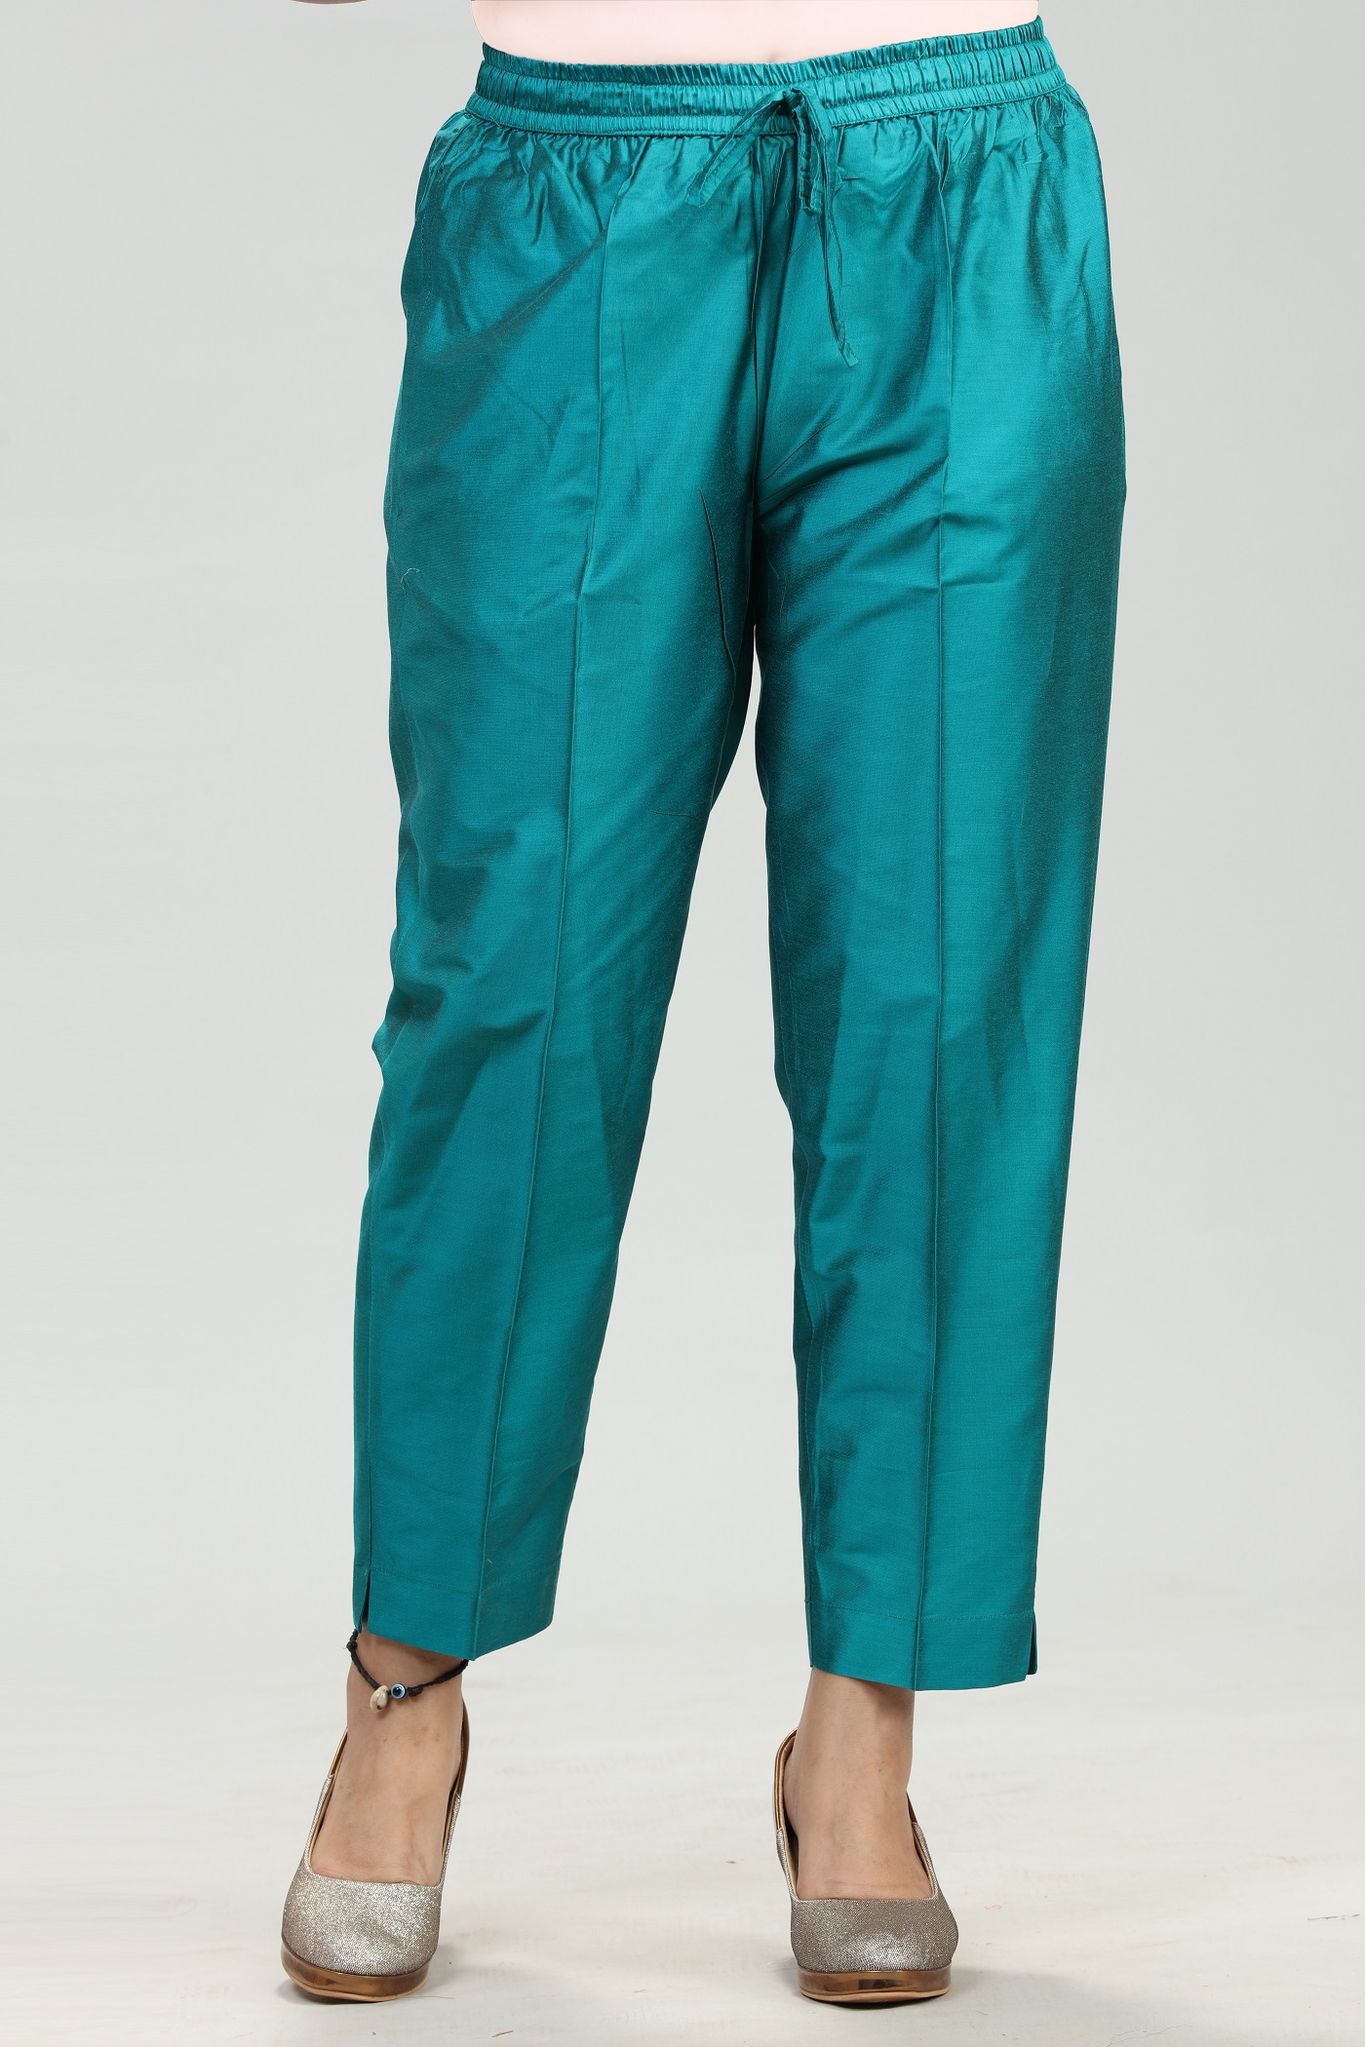 Women's Teal Pant Trousers